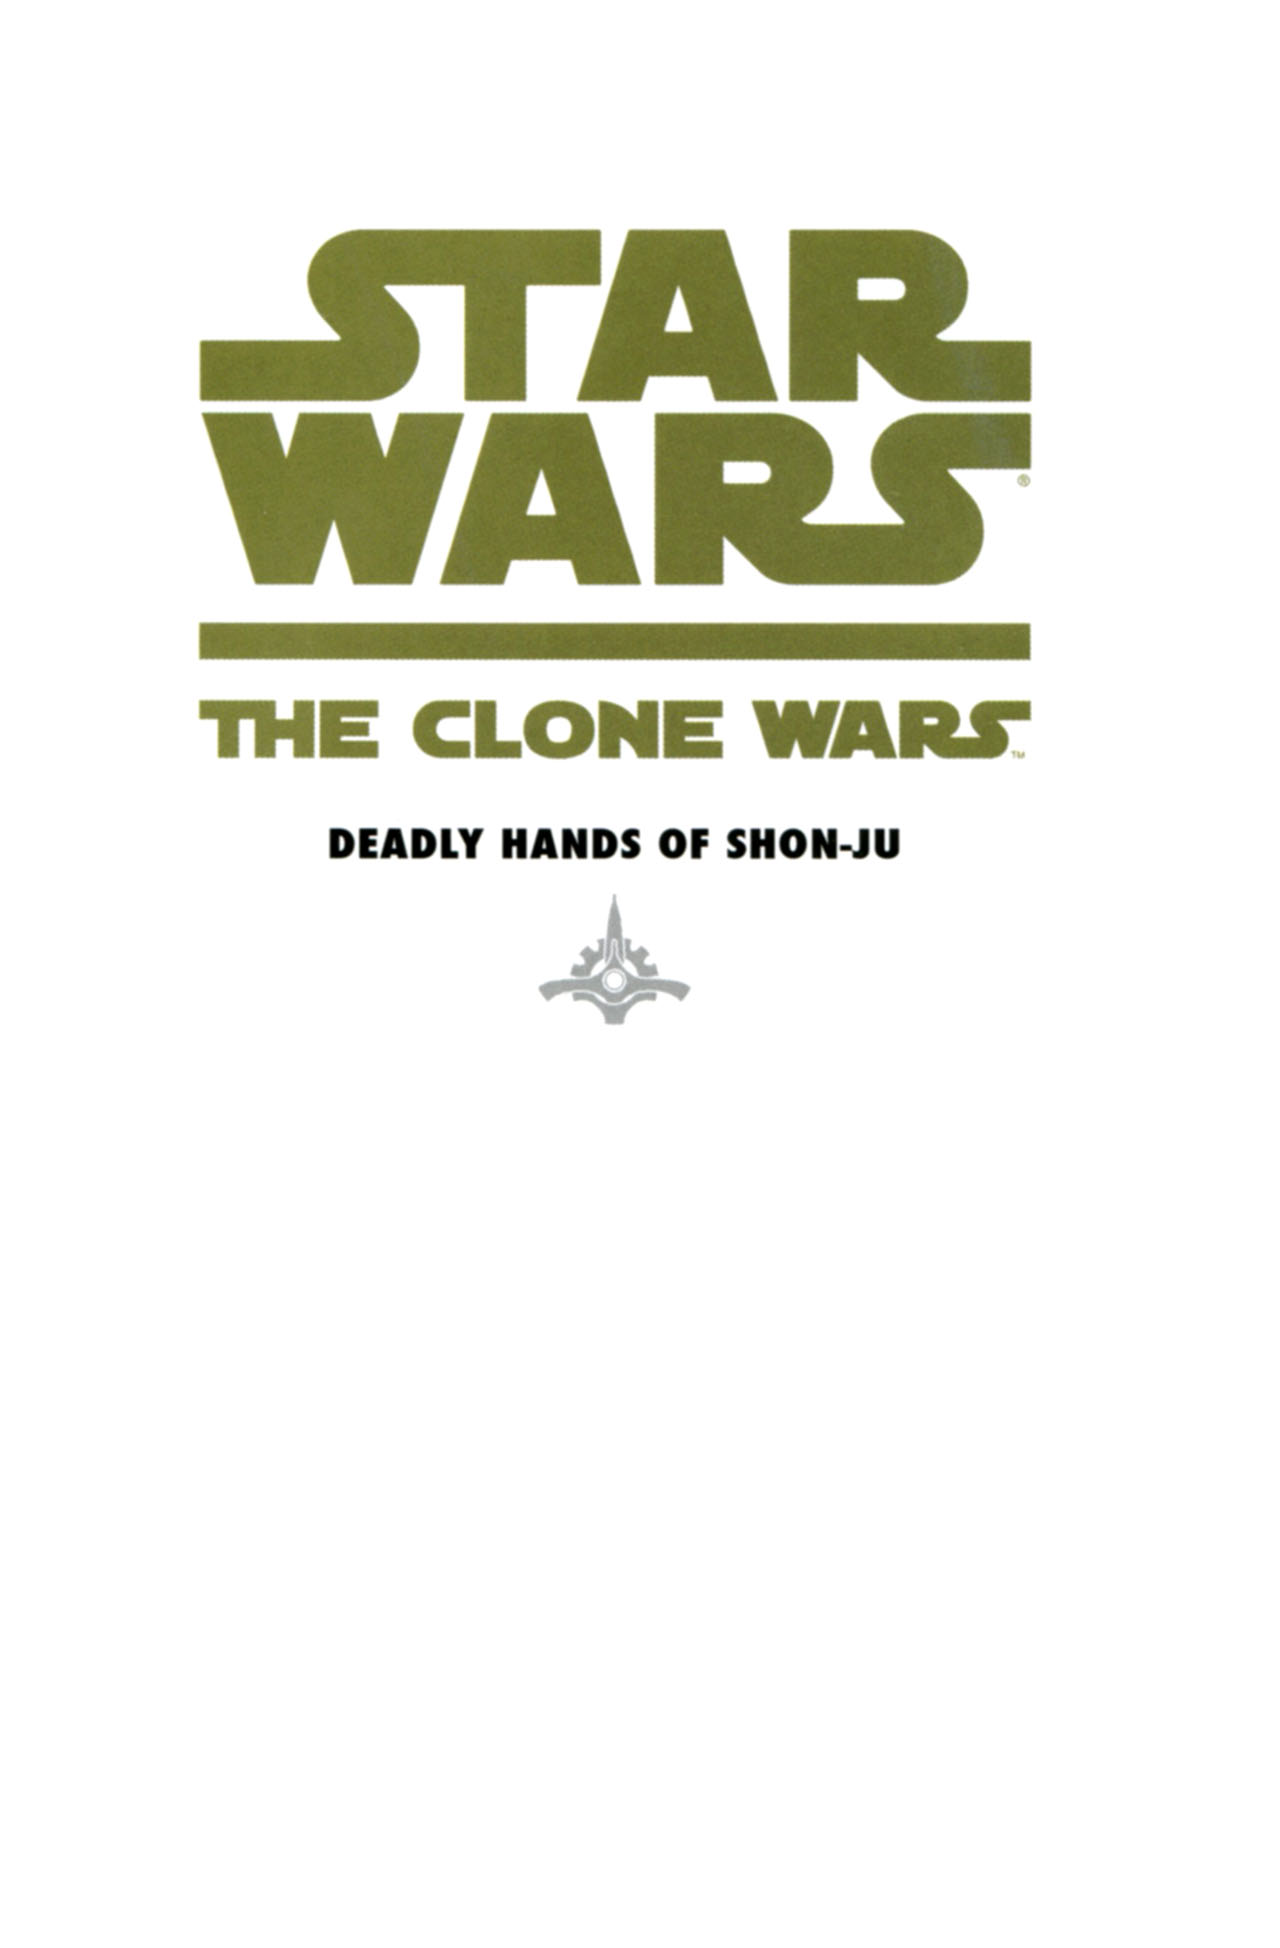 Read online Star Wars: The Clone Wars - Deadly Hands of Shon-Ju comic -  Issue # Full - 3